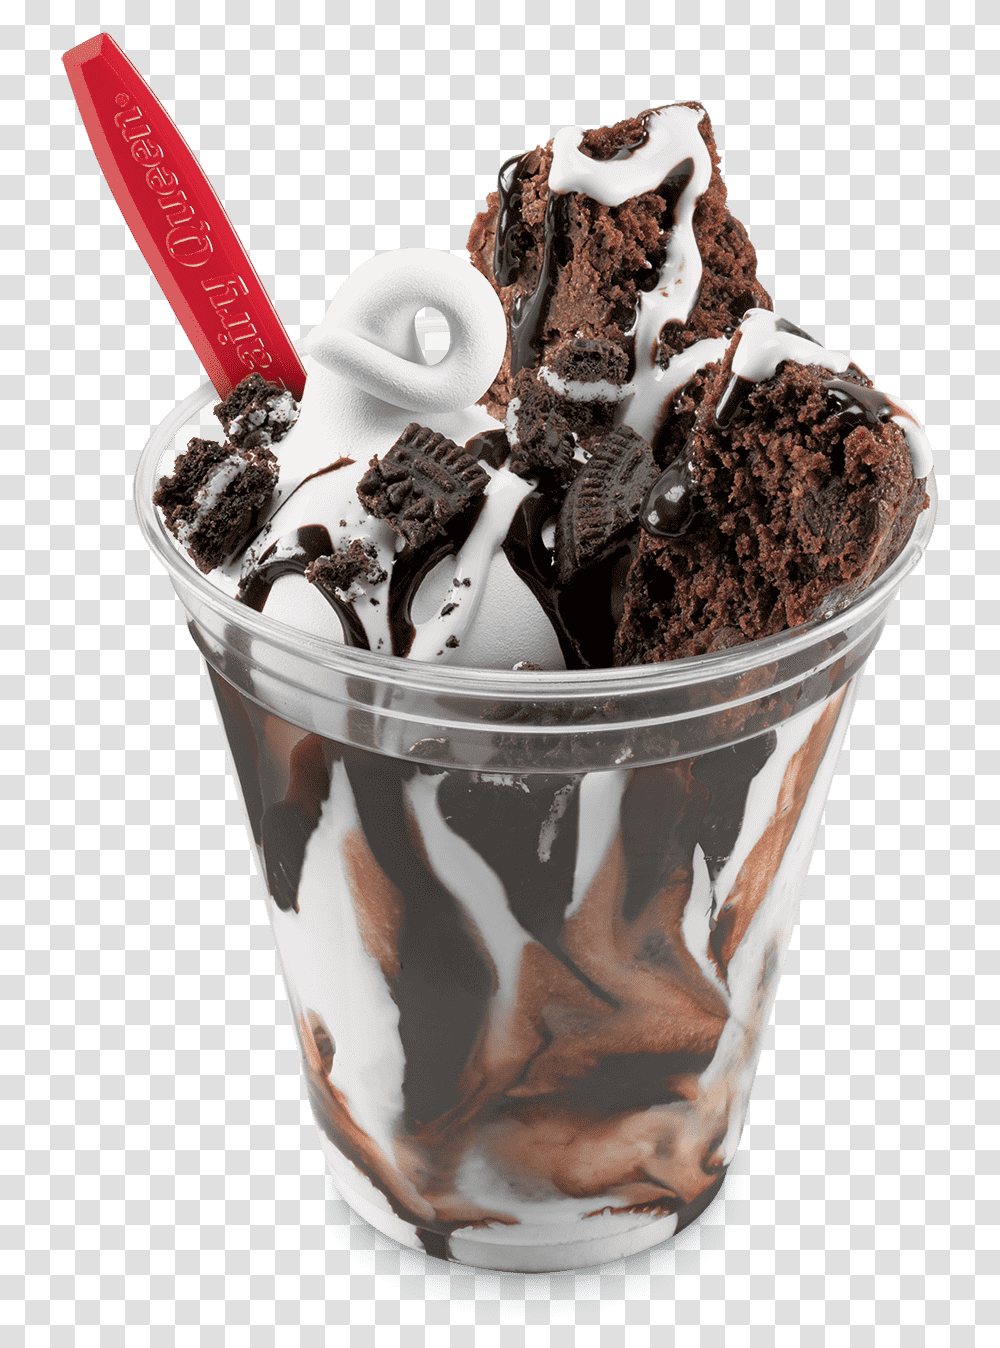 Brownie And Oreo Cupfection Dairy Queen Menu Dairy Queen Brownie Cupfection, Cream, Dessert, Food, Creme Transparent Png